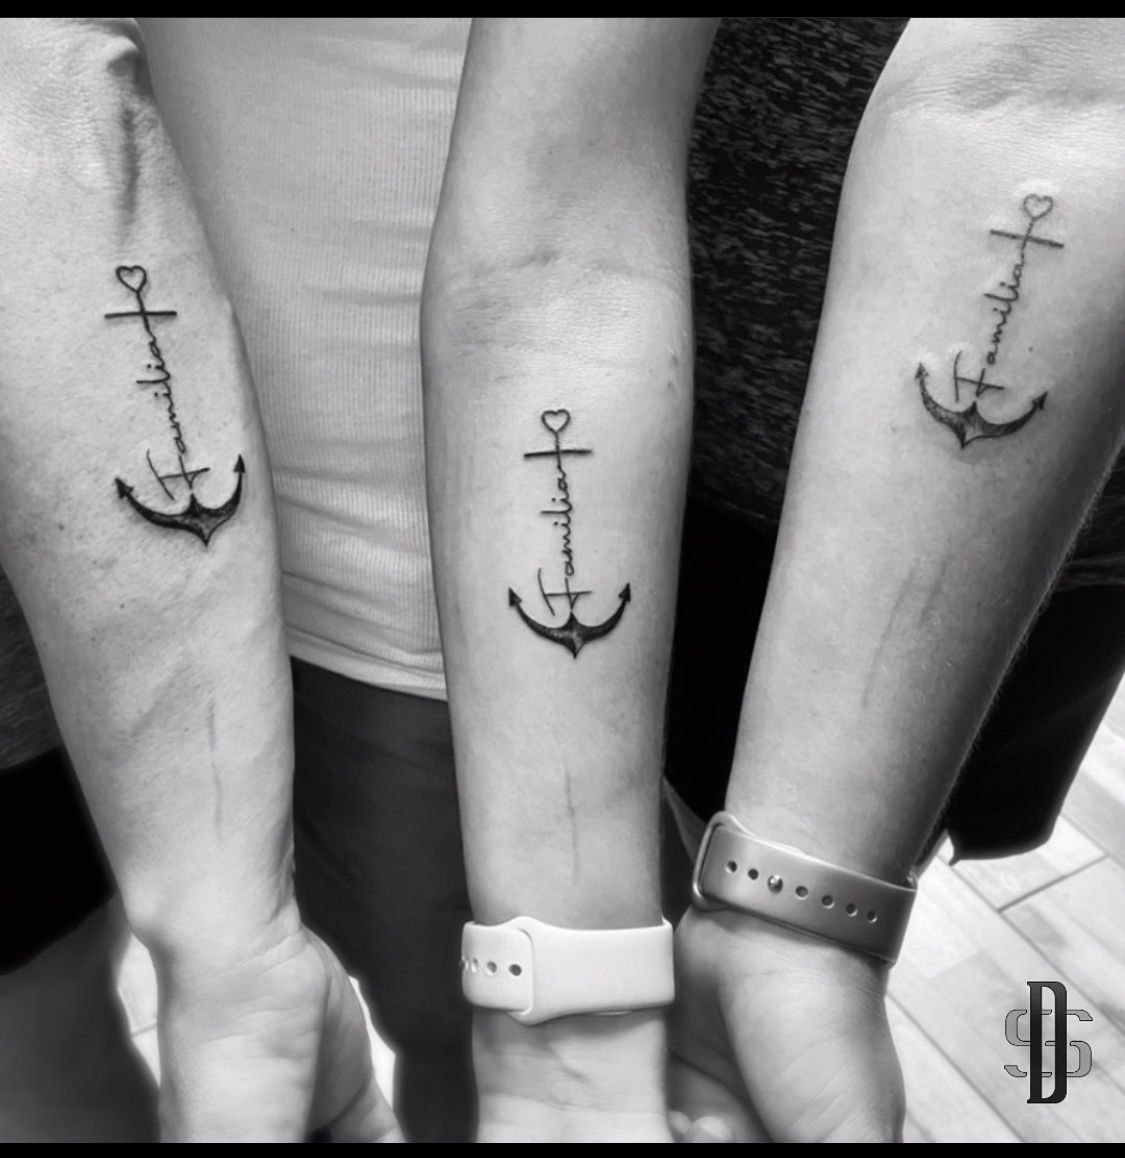 50 Exclusive Anchor Tattoo Designs For Women - Blurmark | Couples tattoo  designs, Friend tattoos, Anchor tattoo design